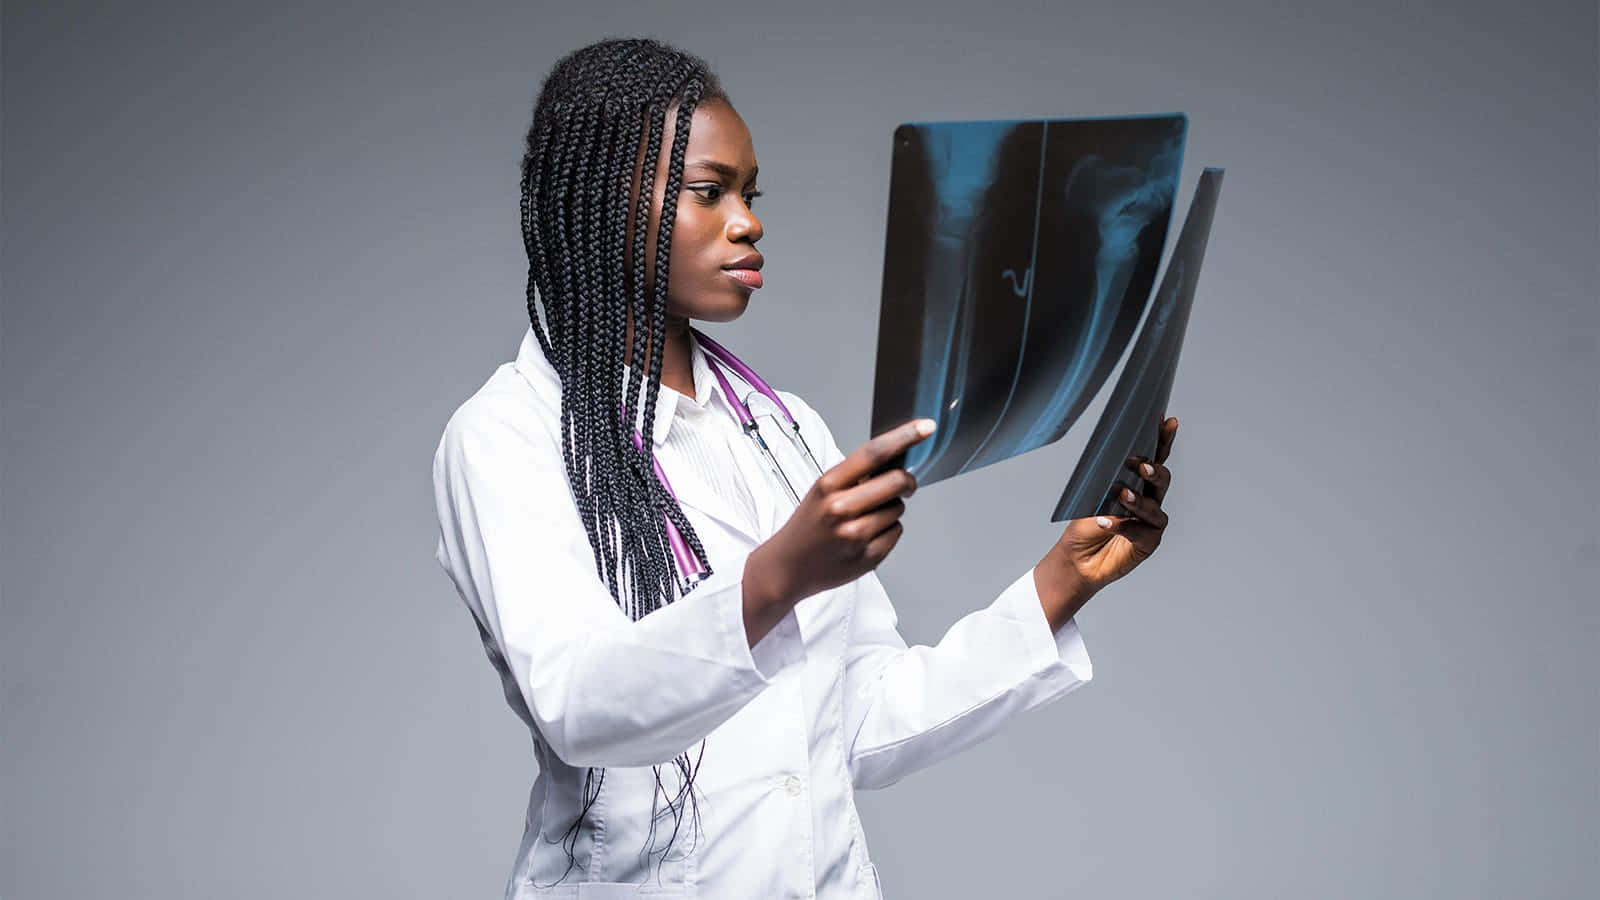 Radiant Young Black Woman with X-Rays in a Medical Setting Wallpaper